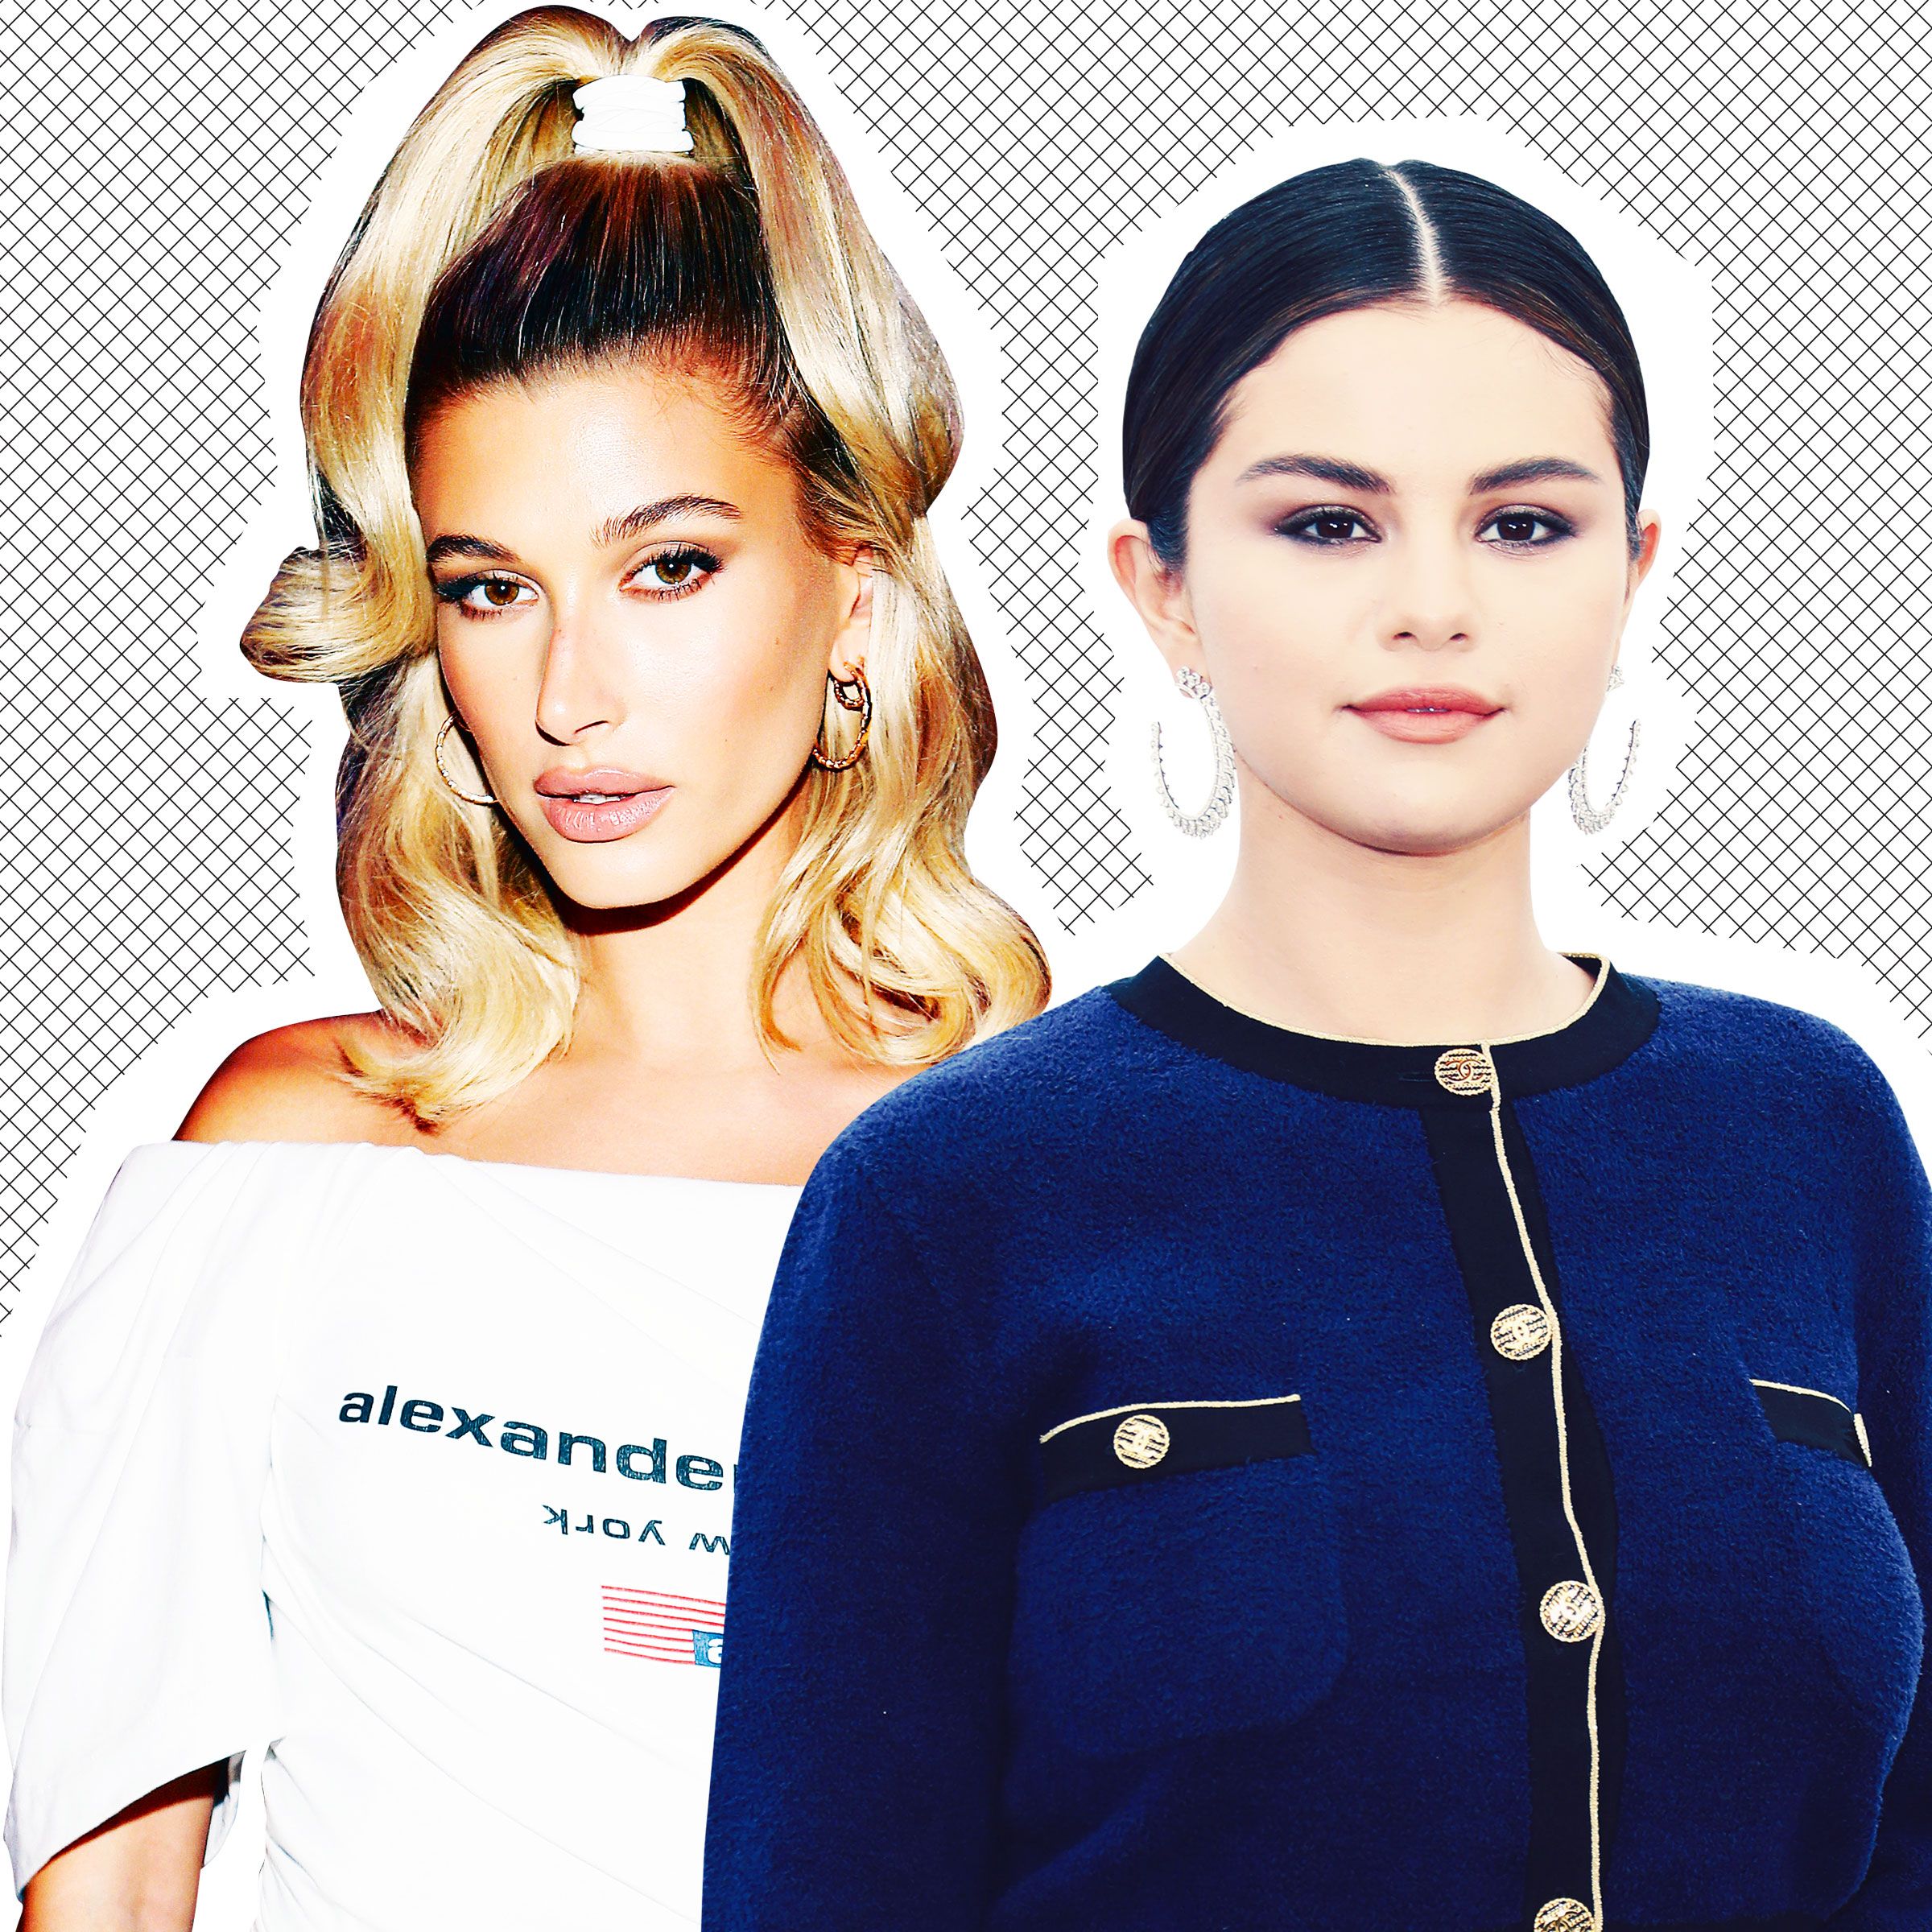 Is Hailey Bieber Upset About Selena Gomez's New Song?